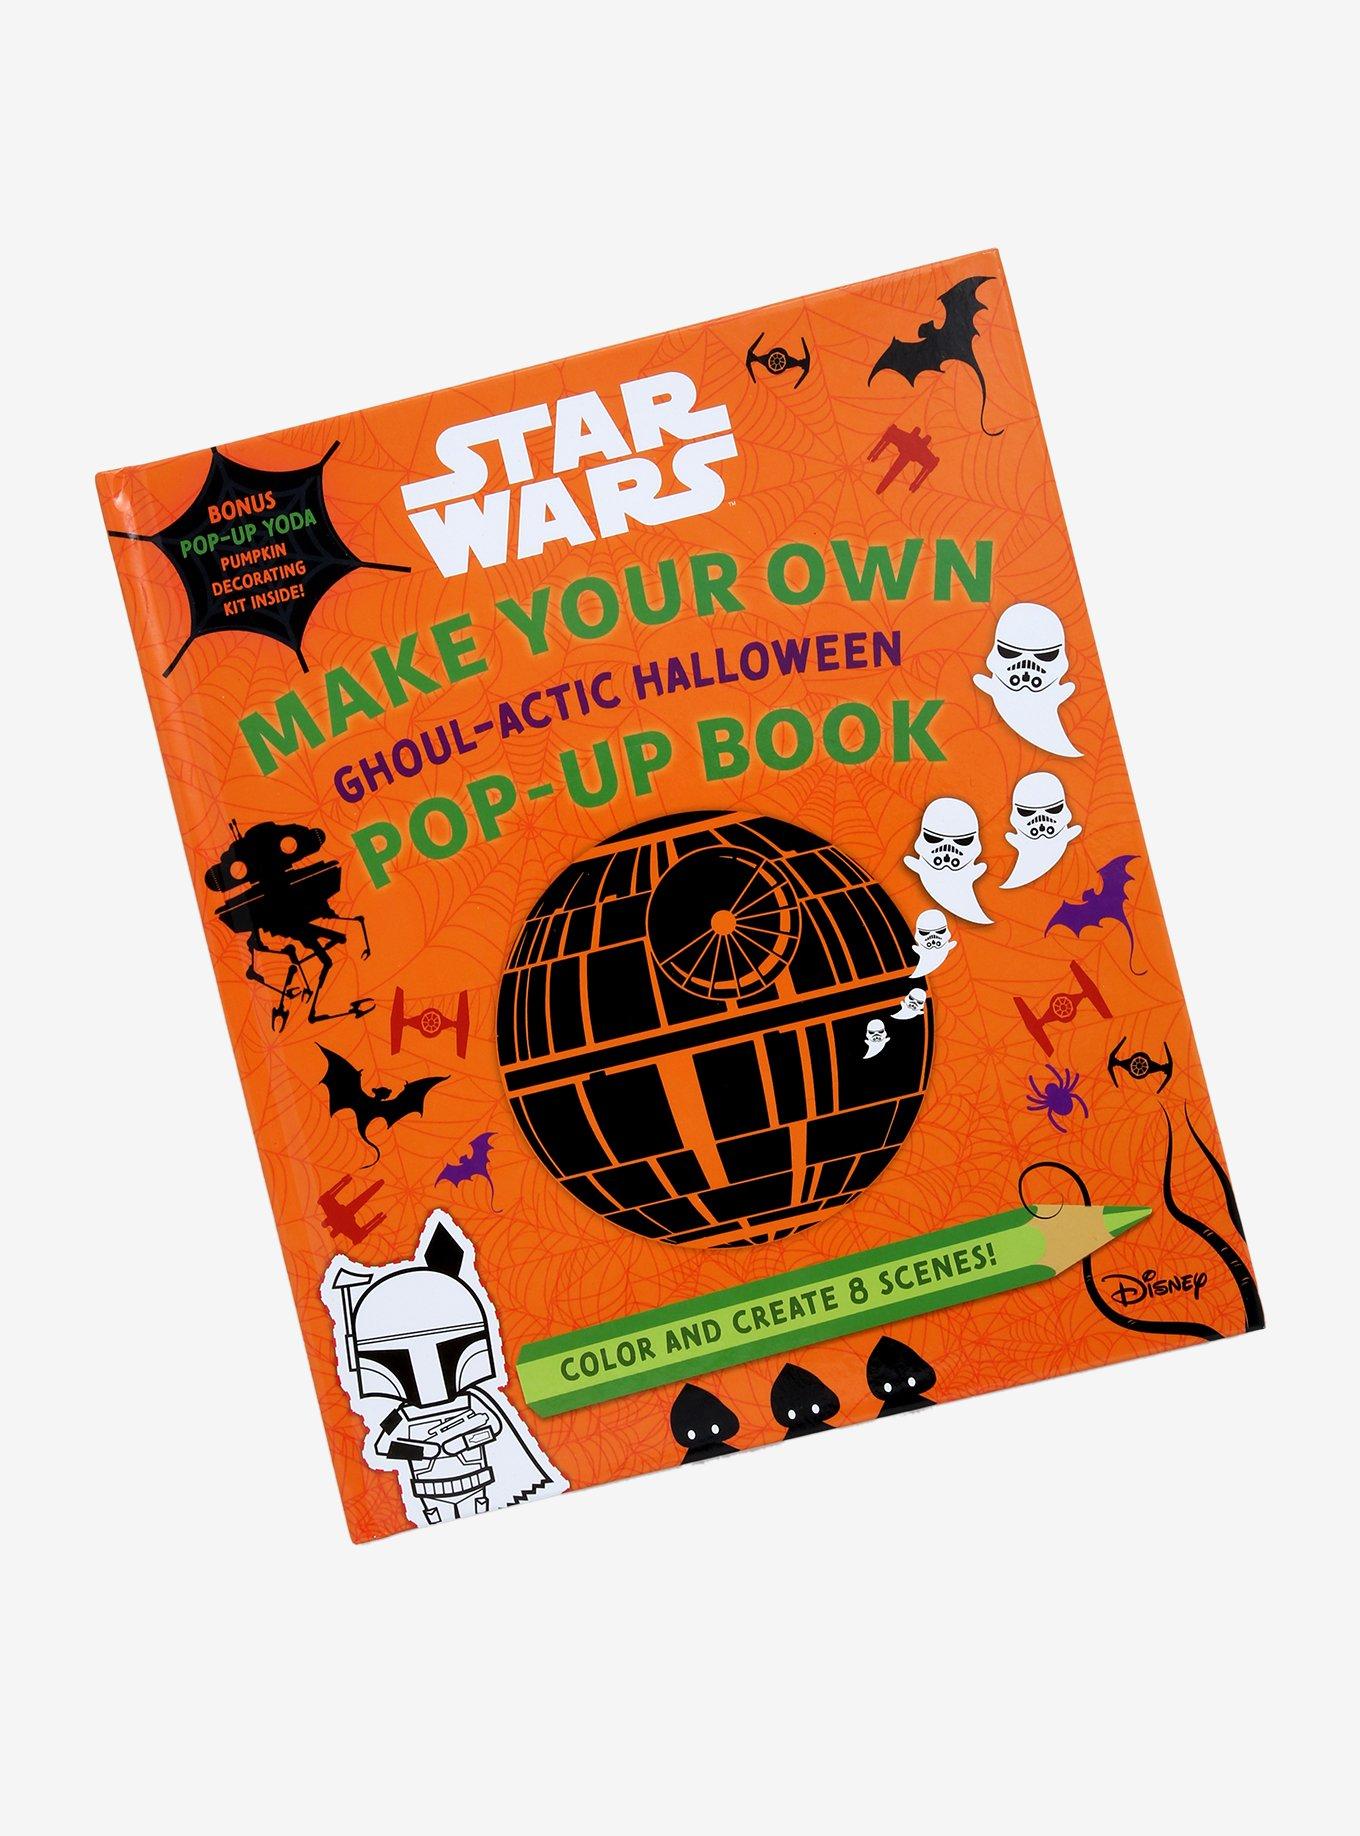 Star Wars: Make Your Own Ghoul-Actic Halloween Pop-Up Book, , hi-res